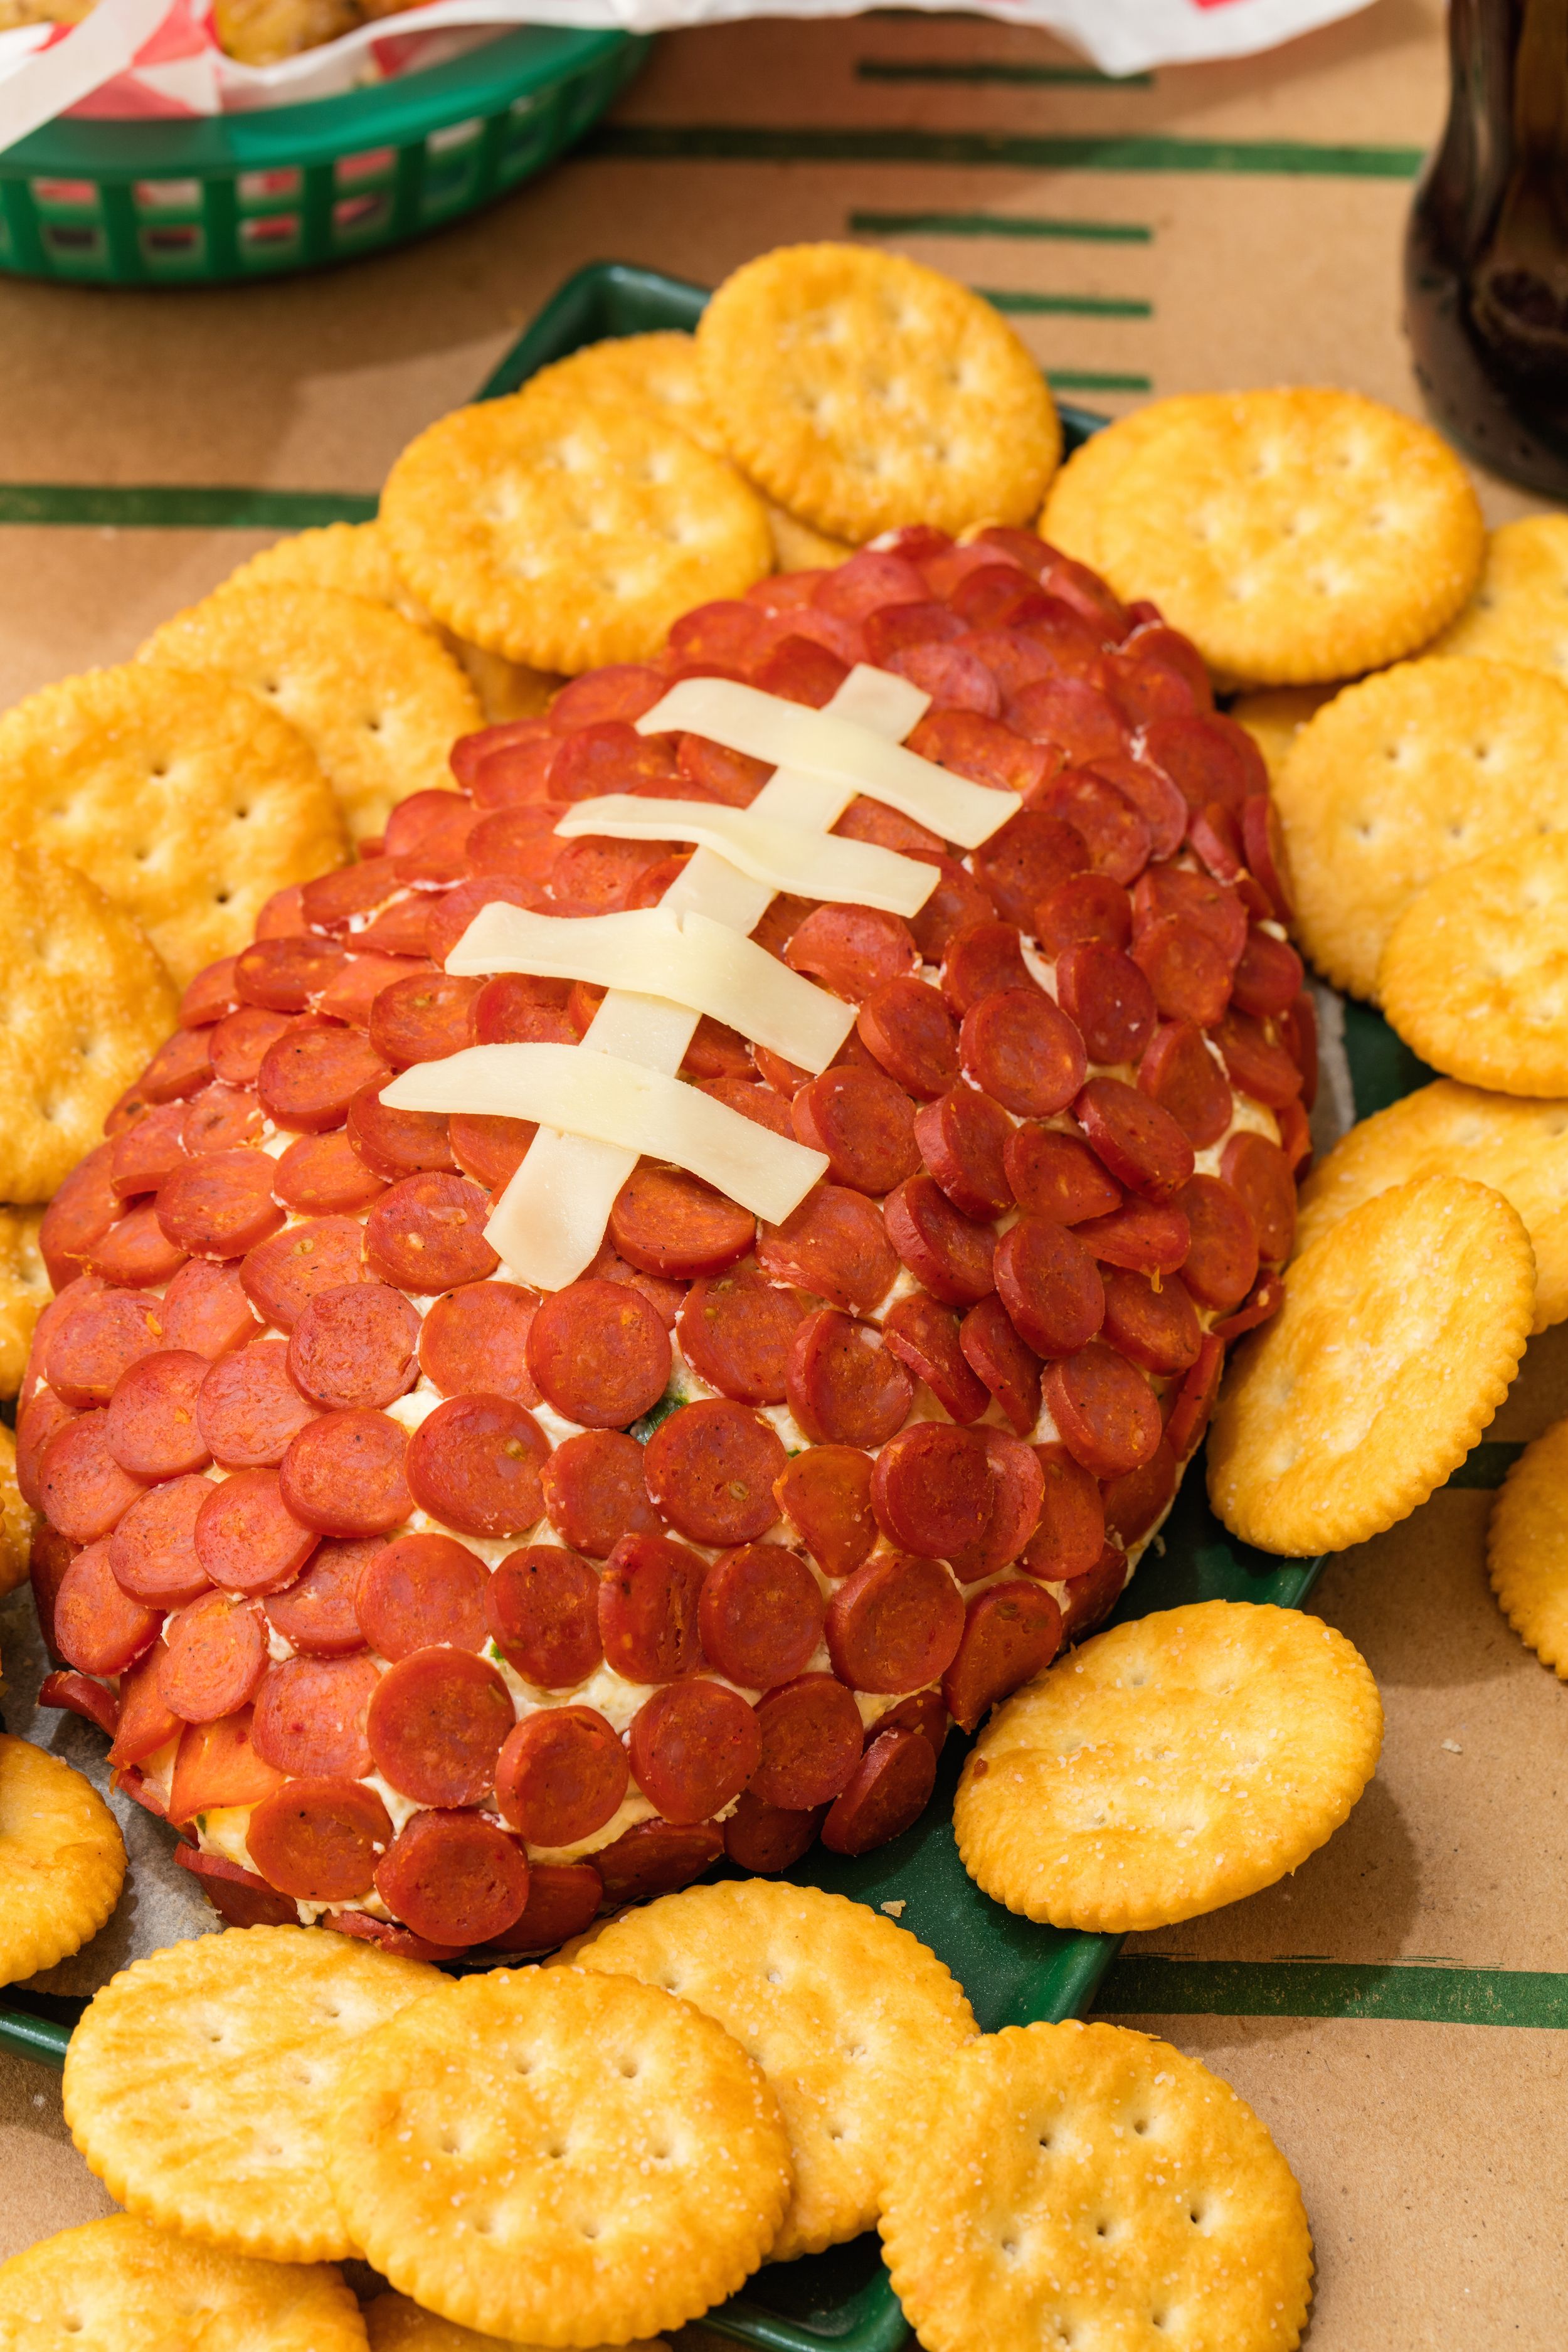 10+ Best Football Shaped Foods - Super Bowl Party Football-Shaped Foods